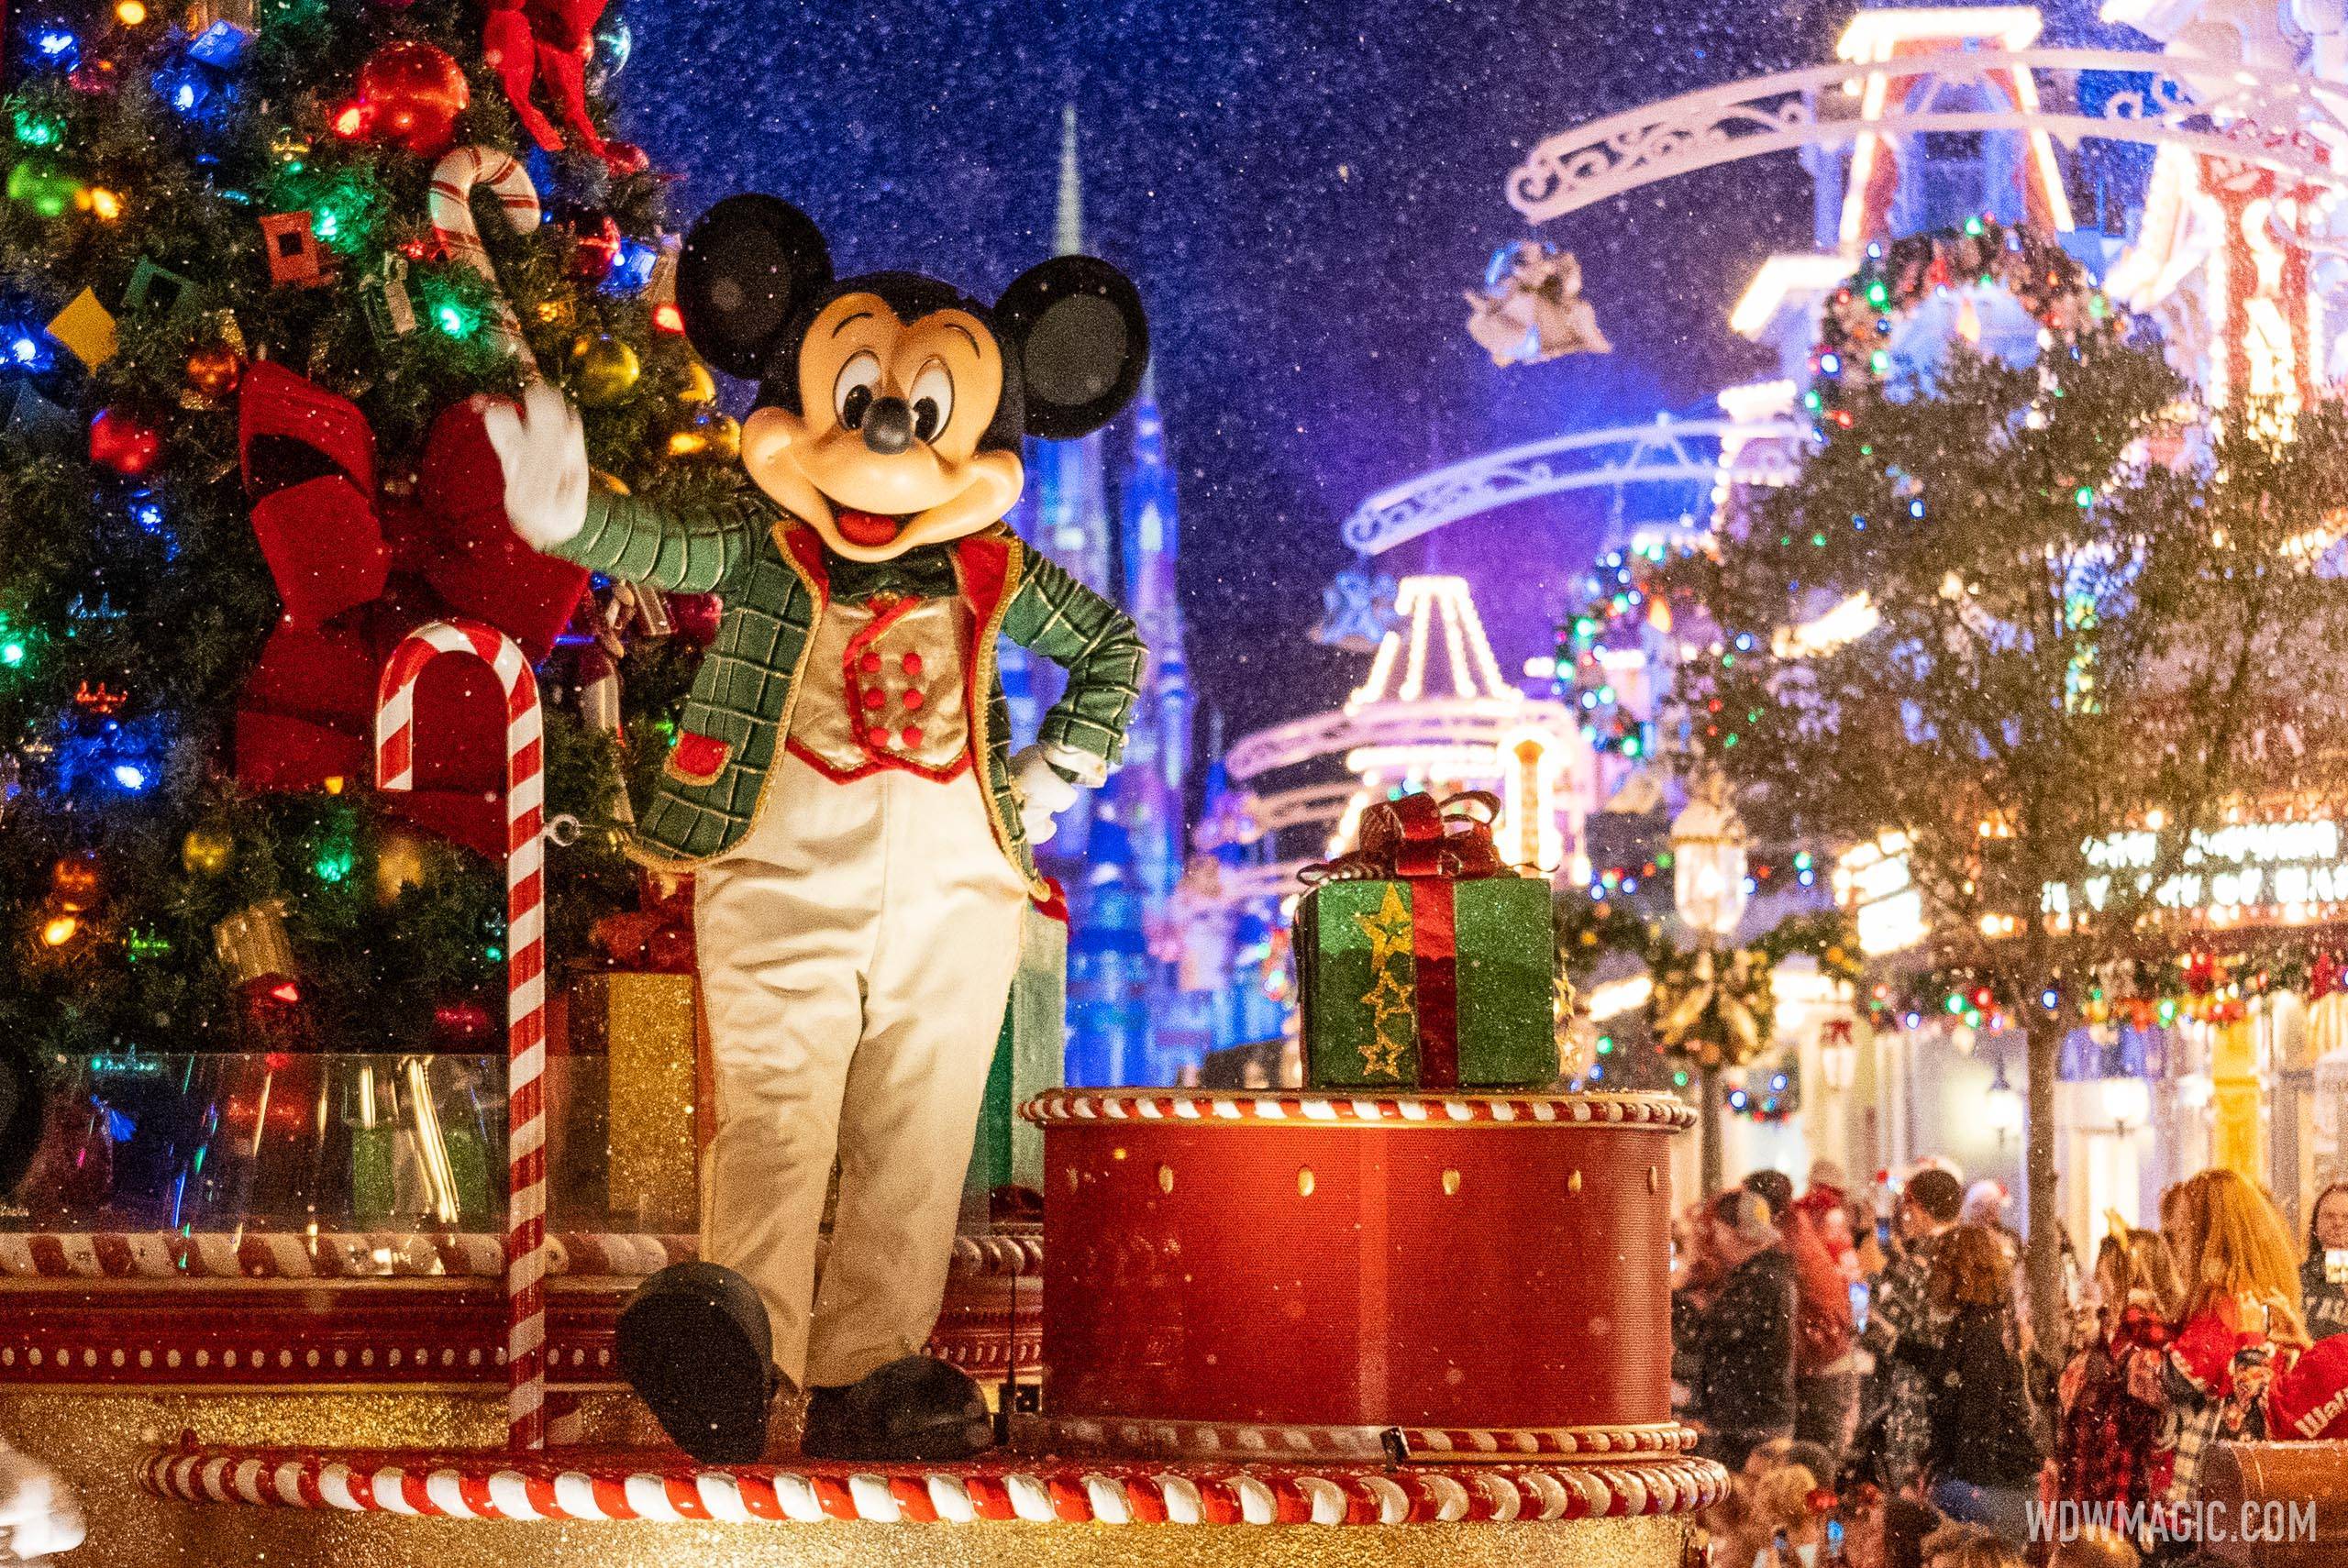 Holidays at the Magic Kingdom 2022 overview